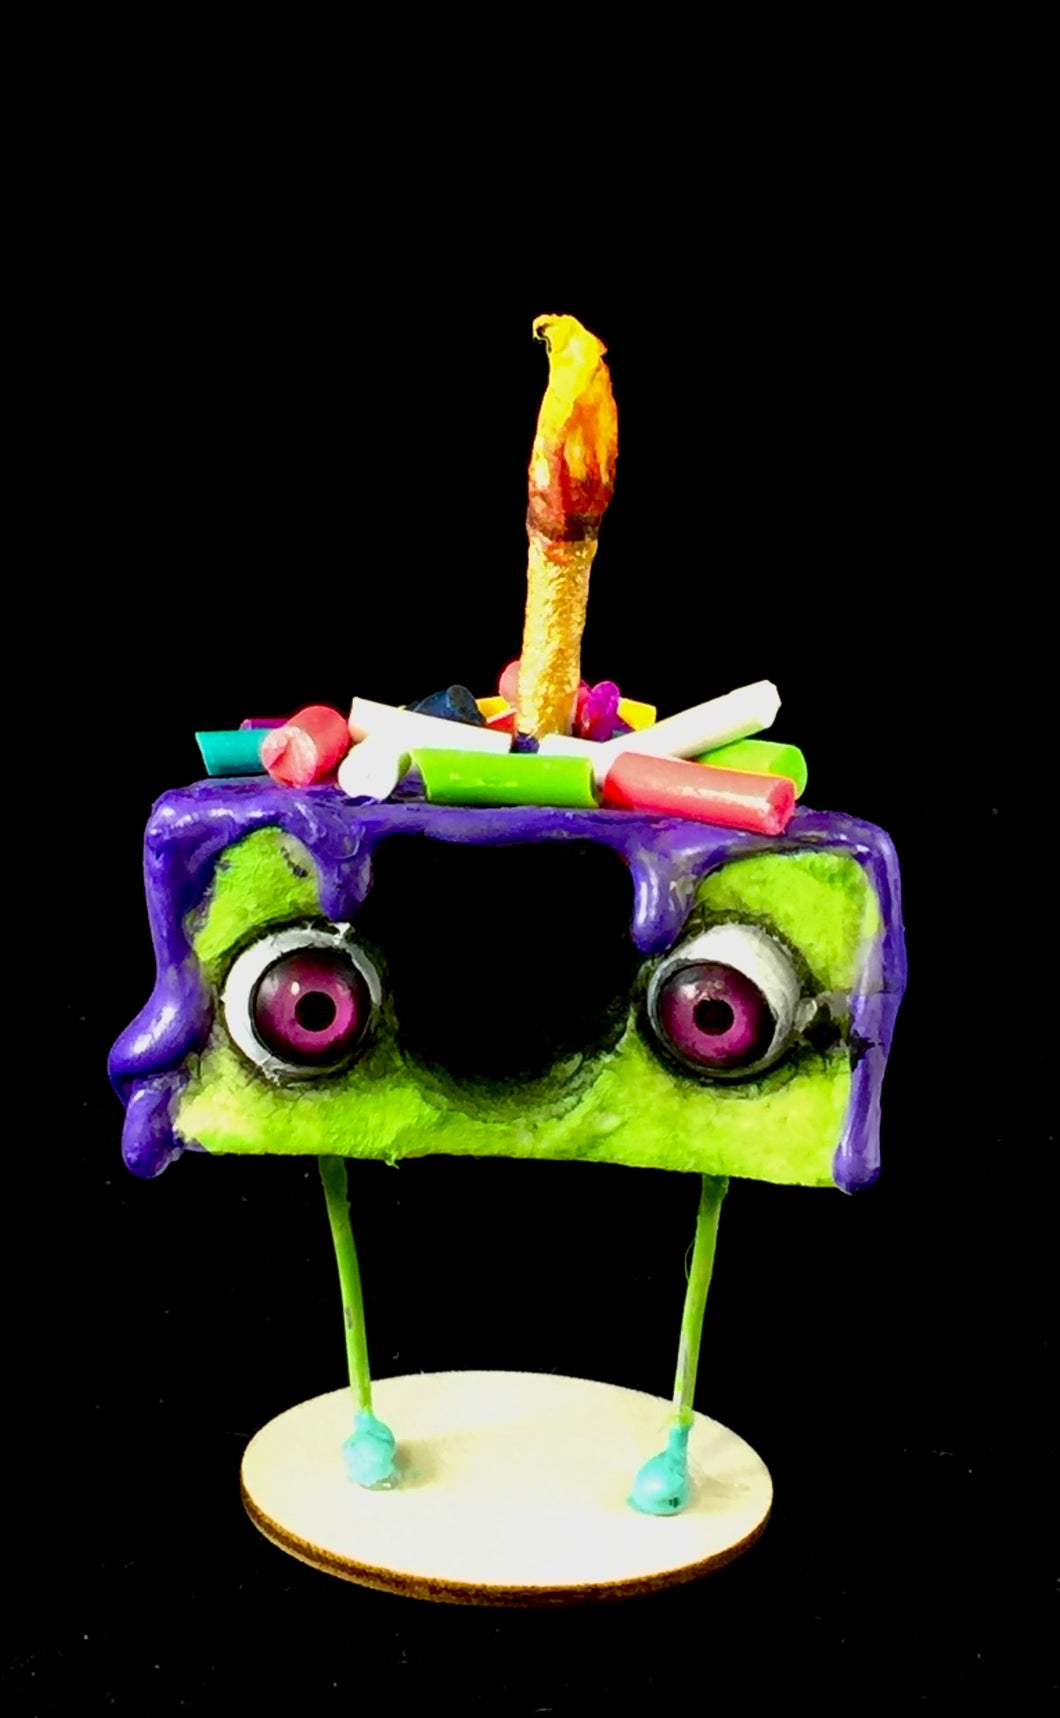 Green Spun Cotton Cake figurine with Purple frosting